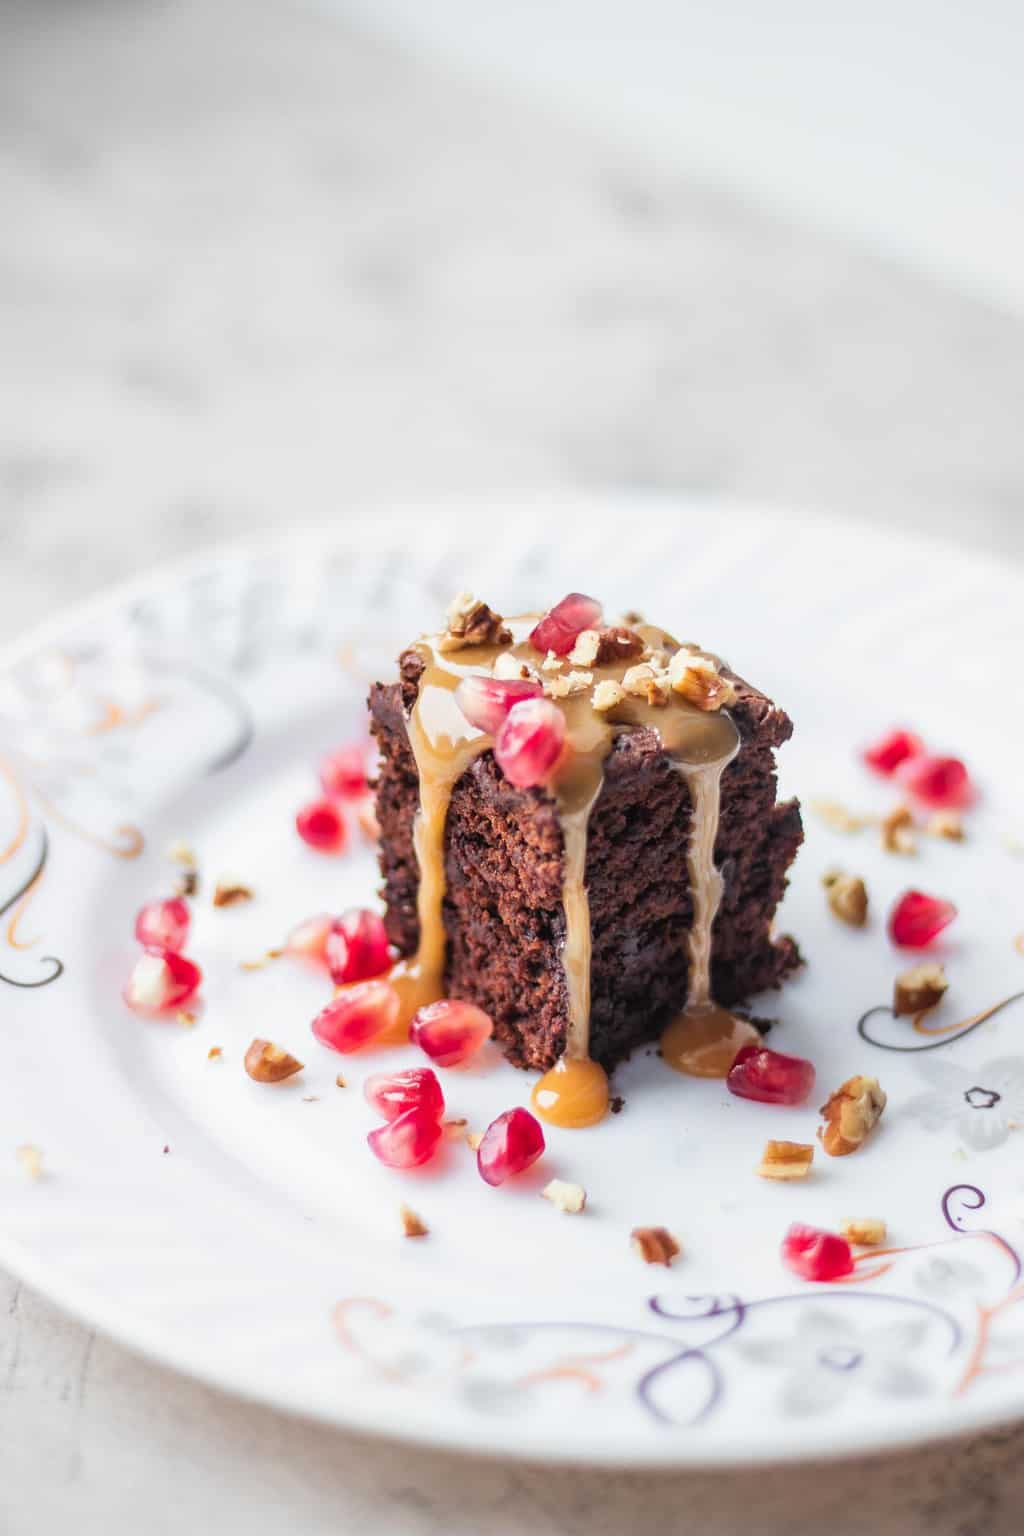 vegan caramel sauce drizzled over chocolate cake and topped with pomegranate kernels and walnuts